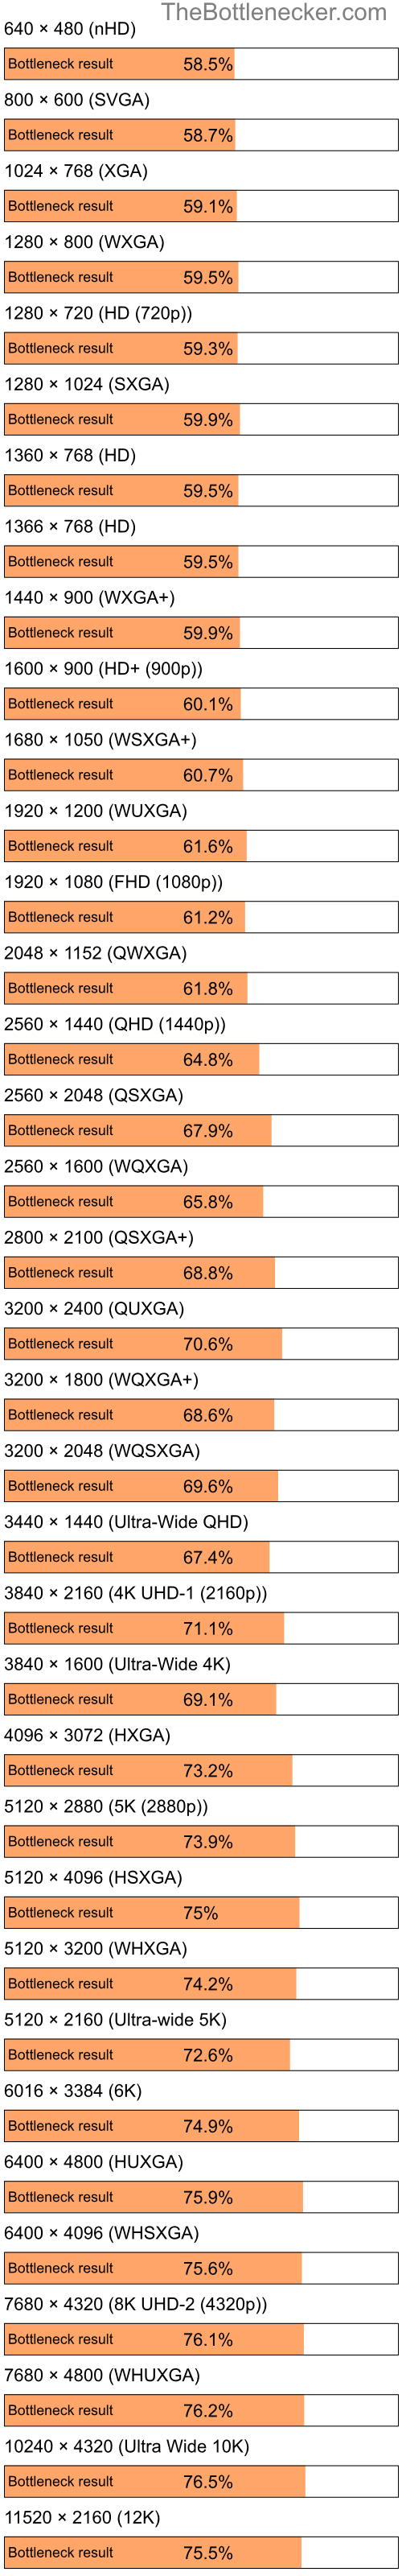 Bottleneck results by resolution for Intel Pentium 4 and NVIDIA GeForce 9300 GE in Processor Intense Tasks